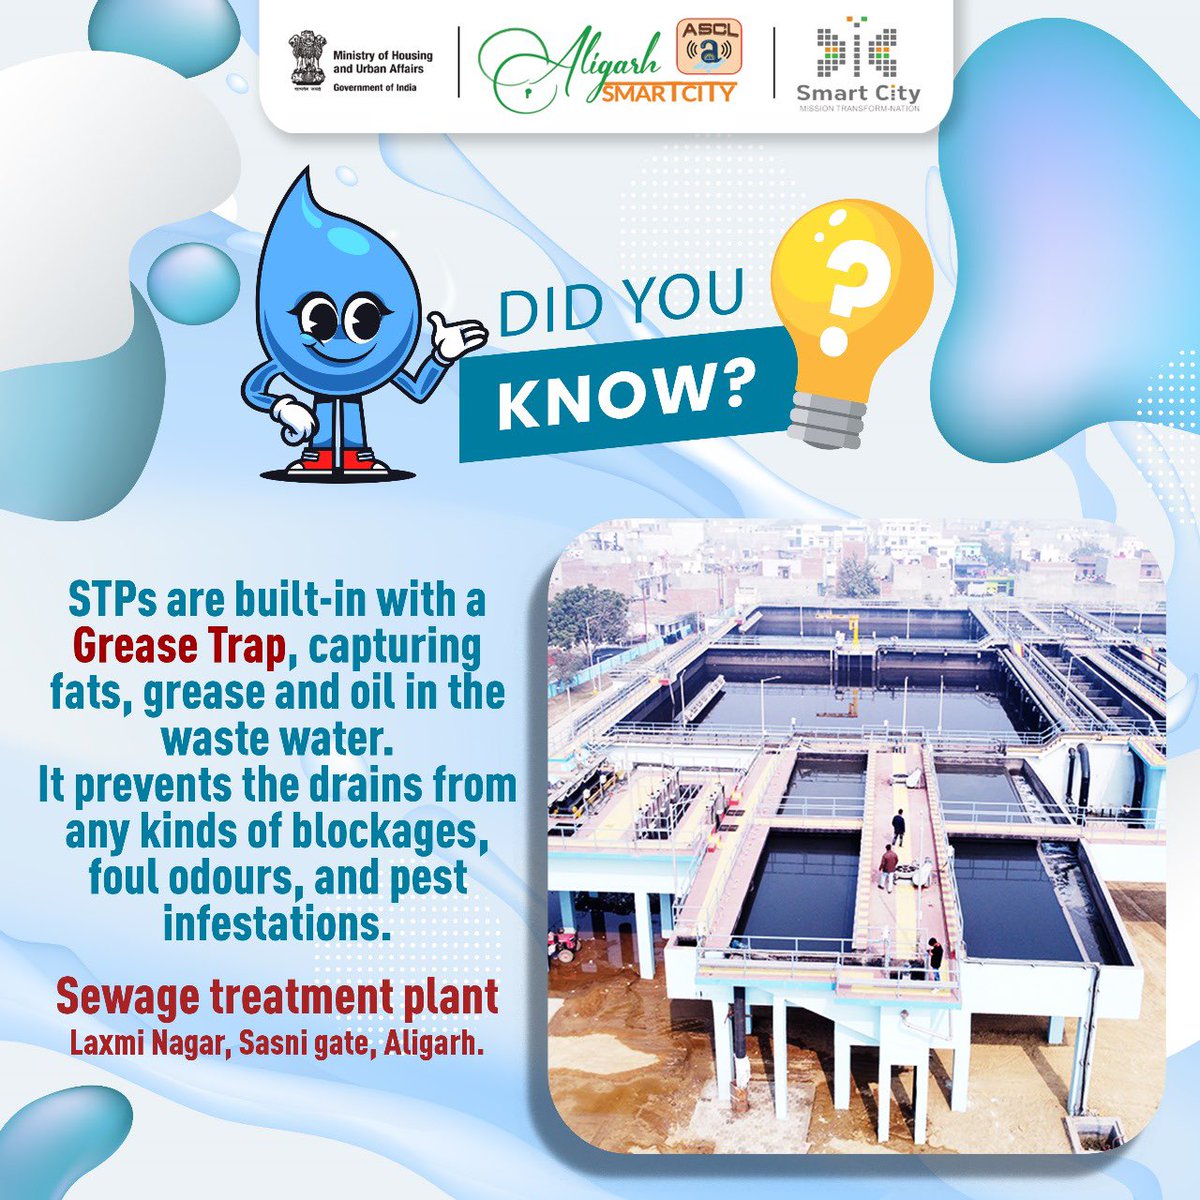 Keep your drains clear and your environment clean with our STPs equipped with Grease Traps! Say goodbye to blockages, foul odors, and pesky pests.
#WasteWaterManagement #CleanEnvironment #aligarhsmartcity #aligarh #smartcitiesmission #smartcities #mohua #aligarhdiaries